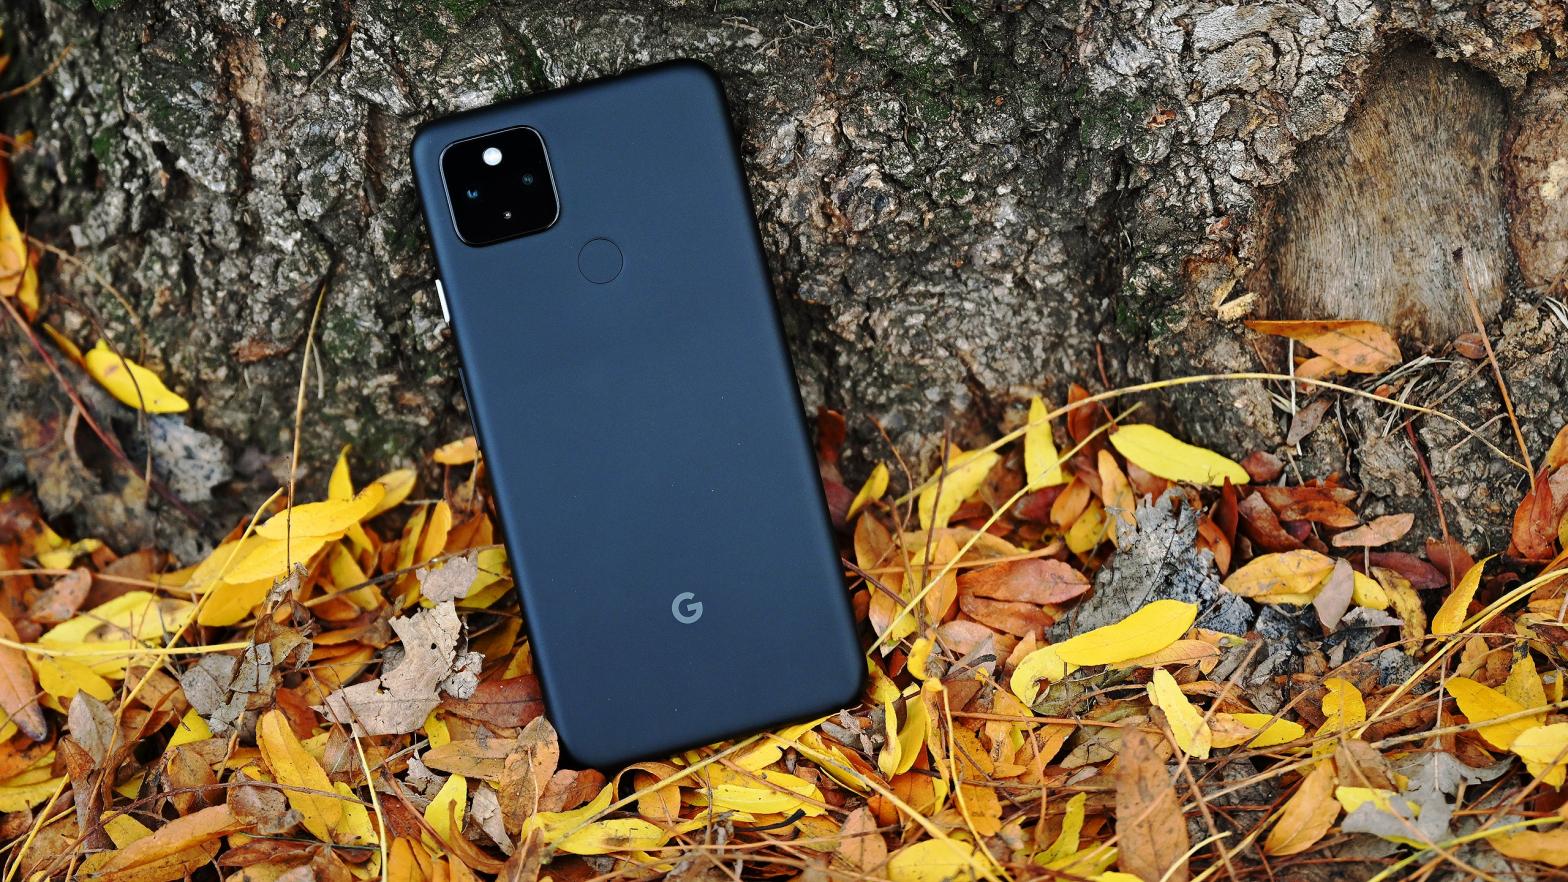 While the upcoming Pixel 5a looks to feature a similar design to last year's Pixel 4a 5G (pictured above), new leaks suggest its internal specs are closer to those of the standard Pixel 5.  (Photo: Sam Rutherford)